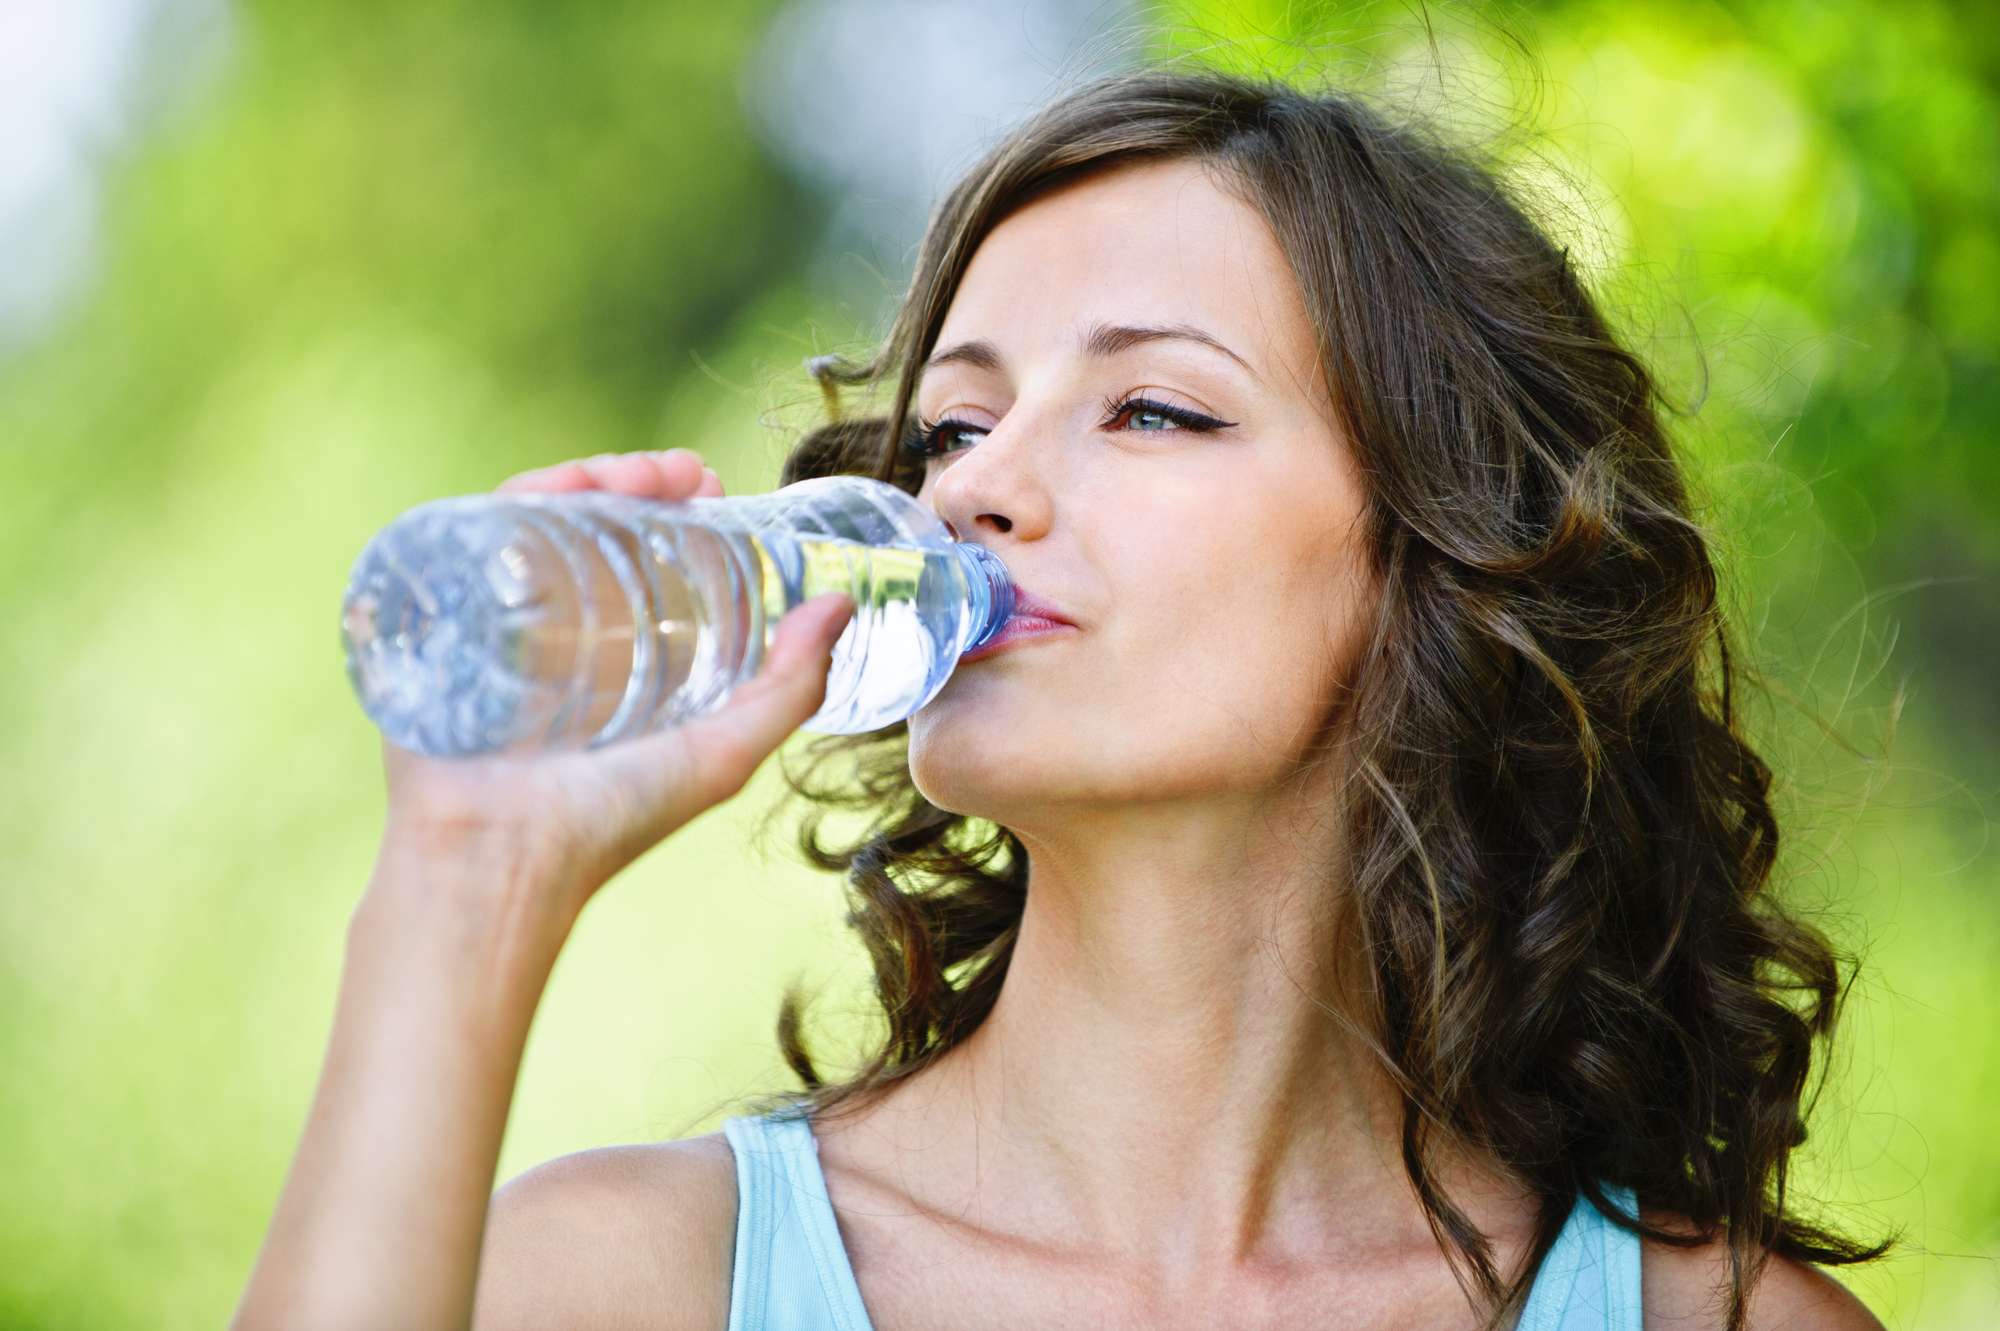 » HOW TO DRINK MORE WATER